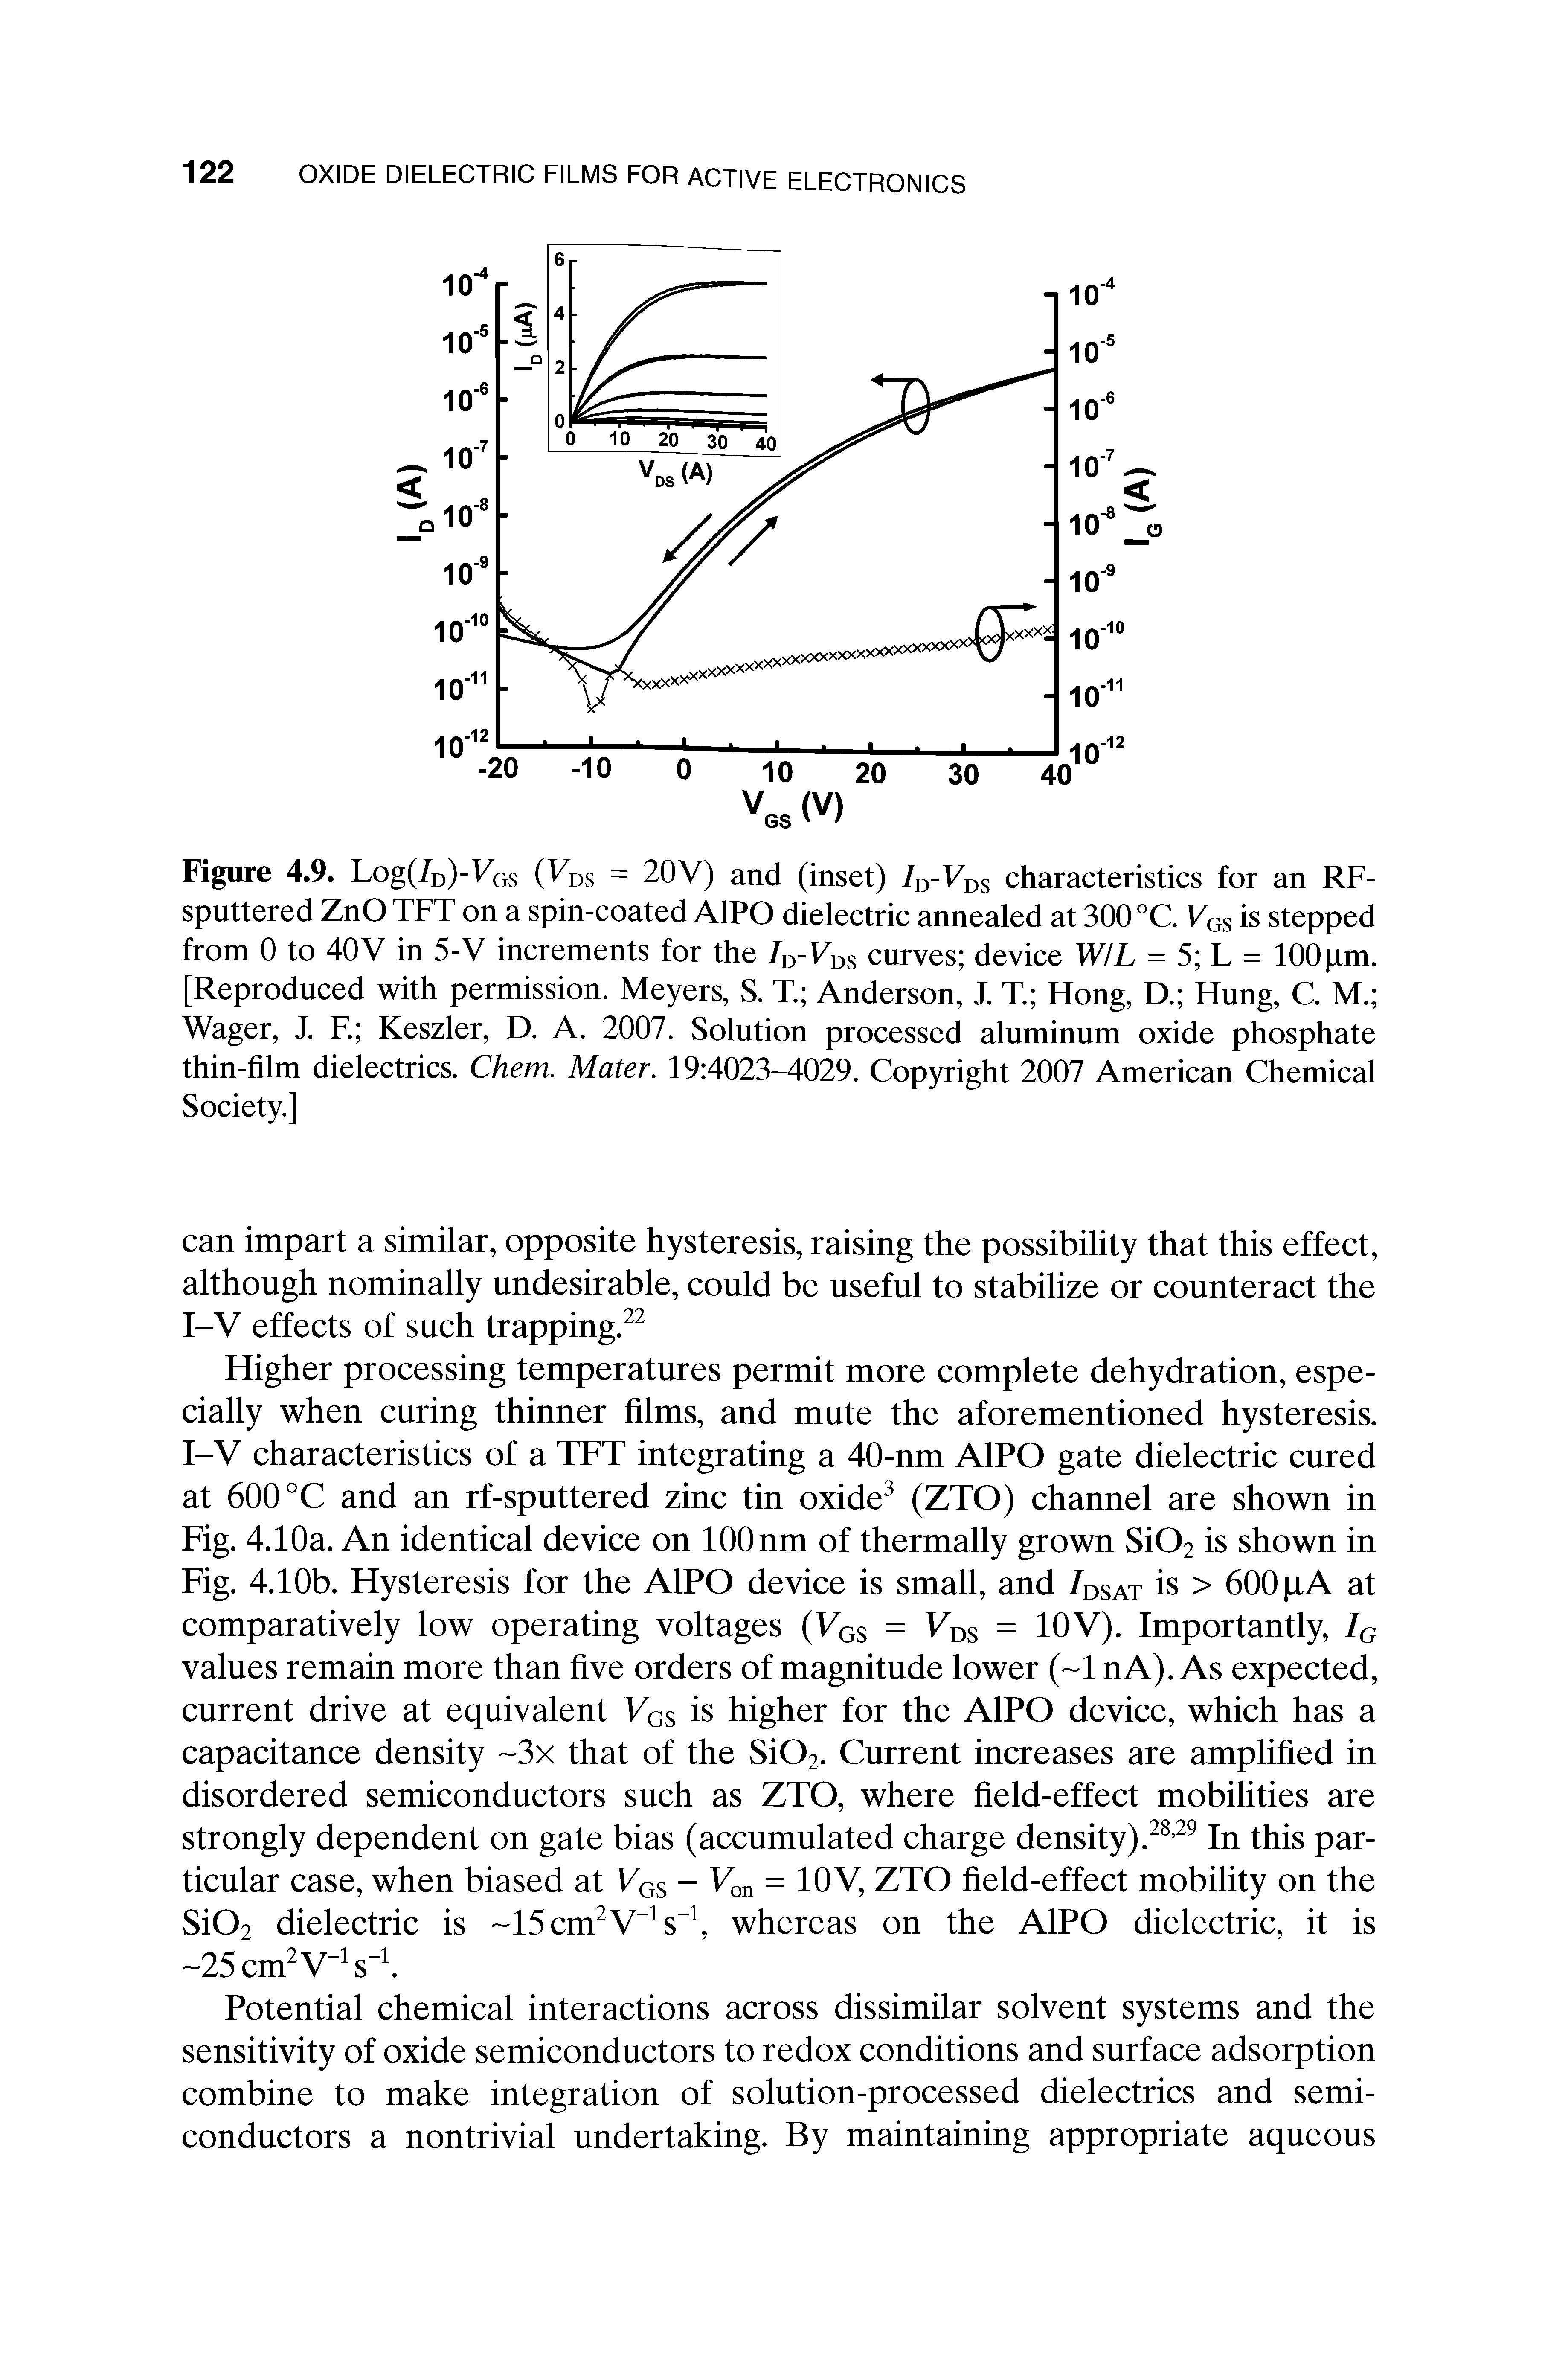 Figure 4.9. Log(/D)-VGS (VDS = 20V) and (inset) /D Vds characteristics for an RF-sputtered ZnO TFT on a spin-coated A1PO dielectric annealed at 300 °C. VGS is stepped from 0 to 40V in 5-V increments for the ID-VDS curves device W/L = 5 L = 100 pm. [Reproduced with permission. Meyers, S. T. Anderson, J. T. Hong, D. Hung, C. M. Wager, J. F. Keszler, D. A. 2007. Solution processed aluminum oxide phosphate thin-film dielectrics. Chem. Mater. 19 4023-4029. Copyright 2007 American Chemical Society.]...